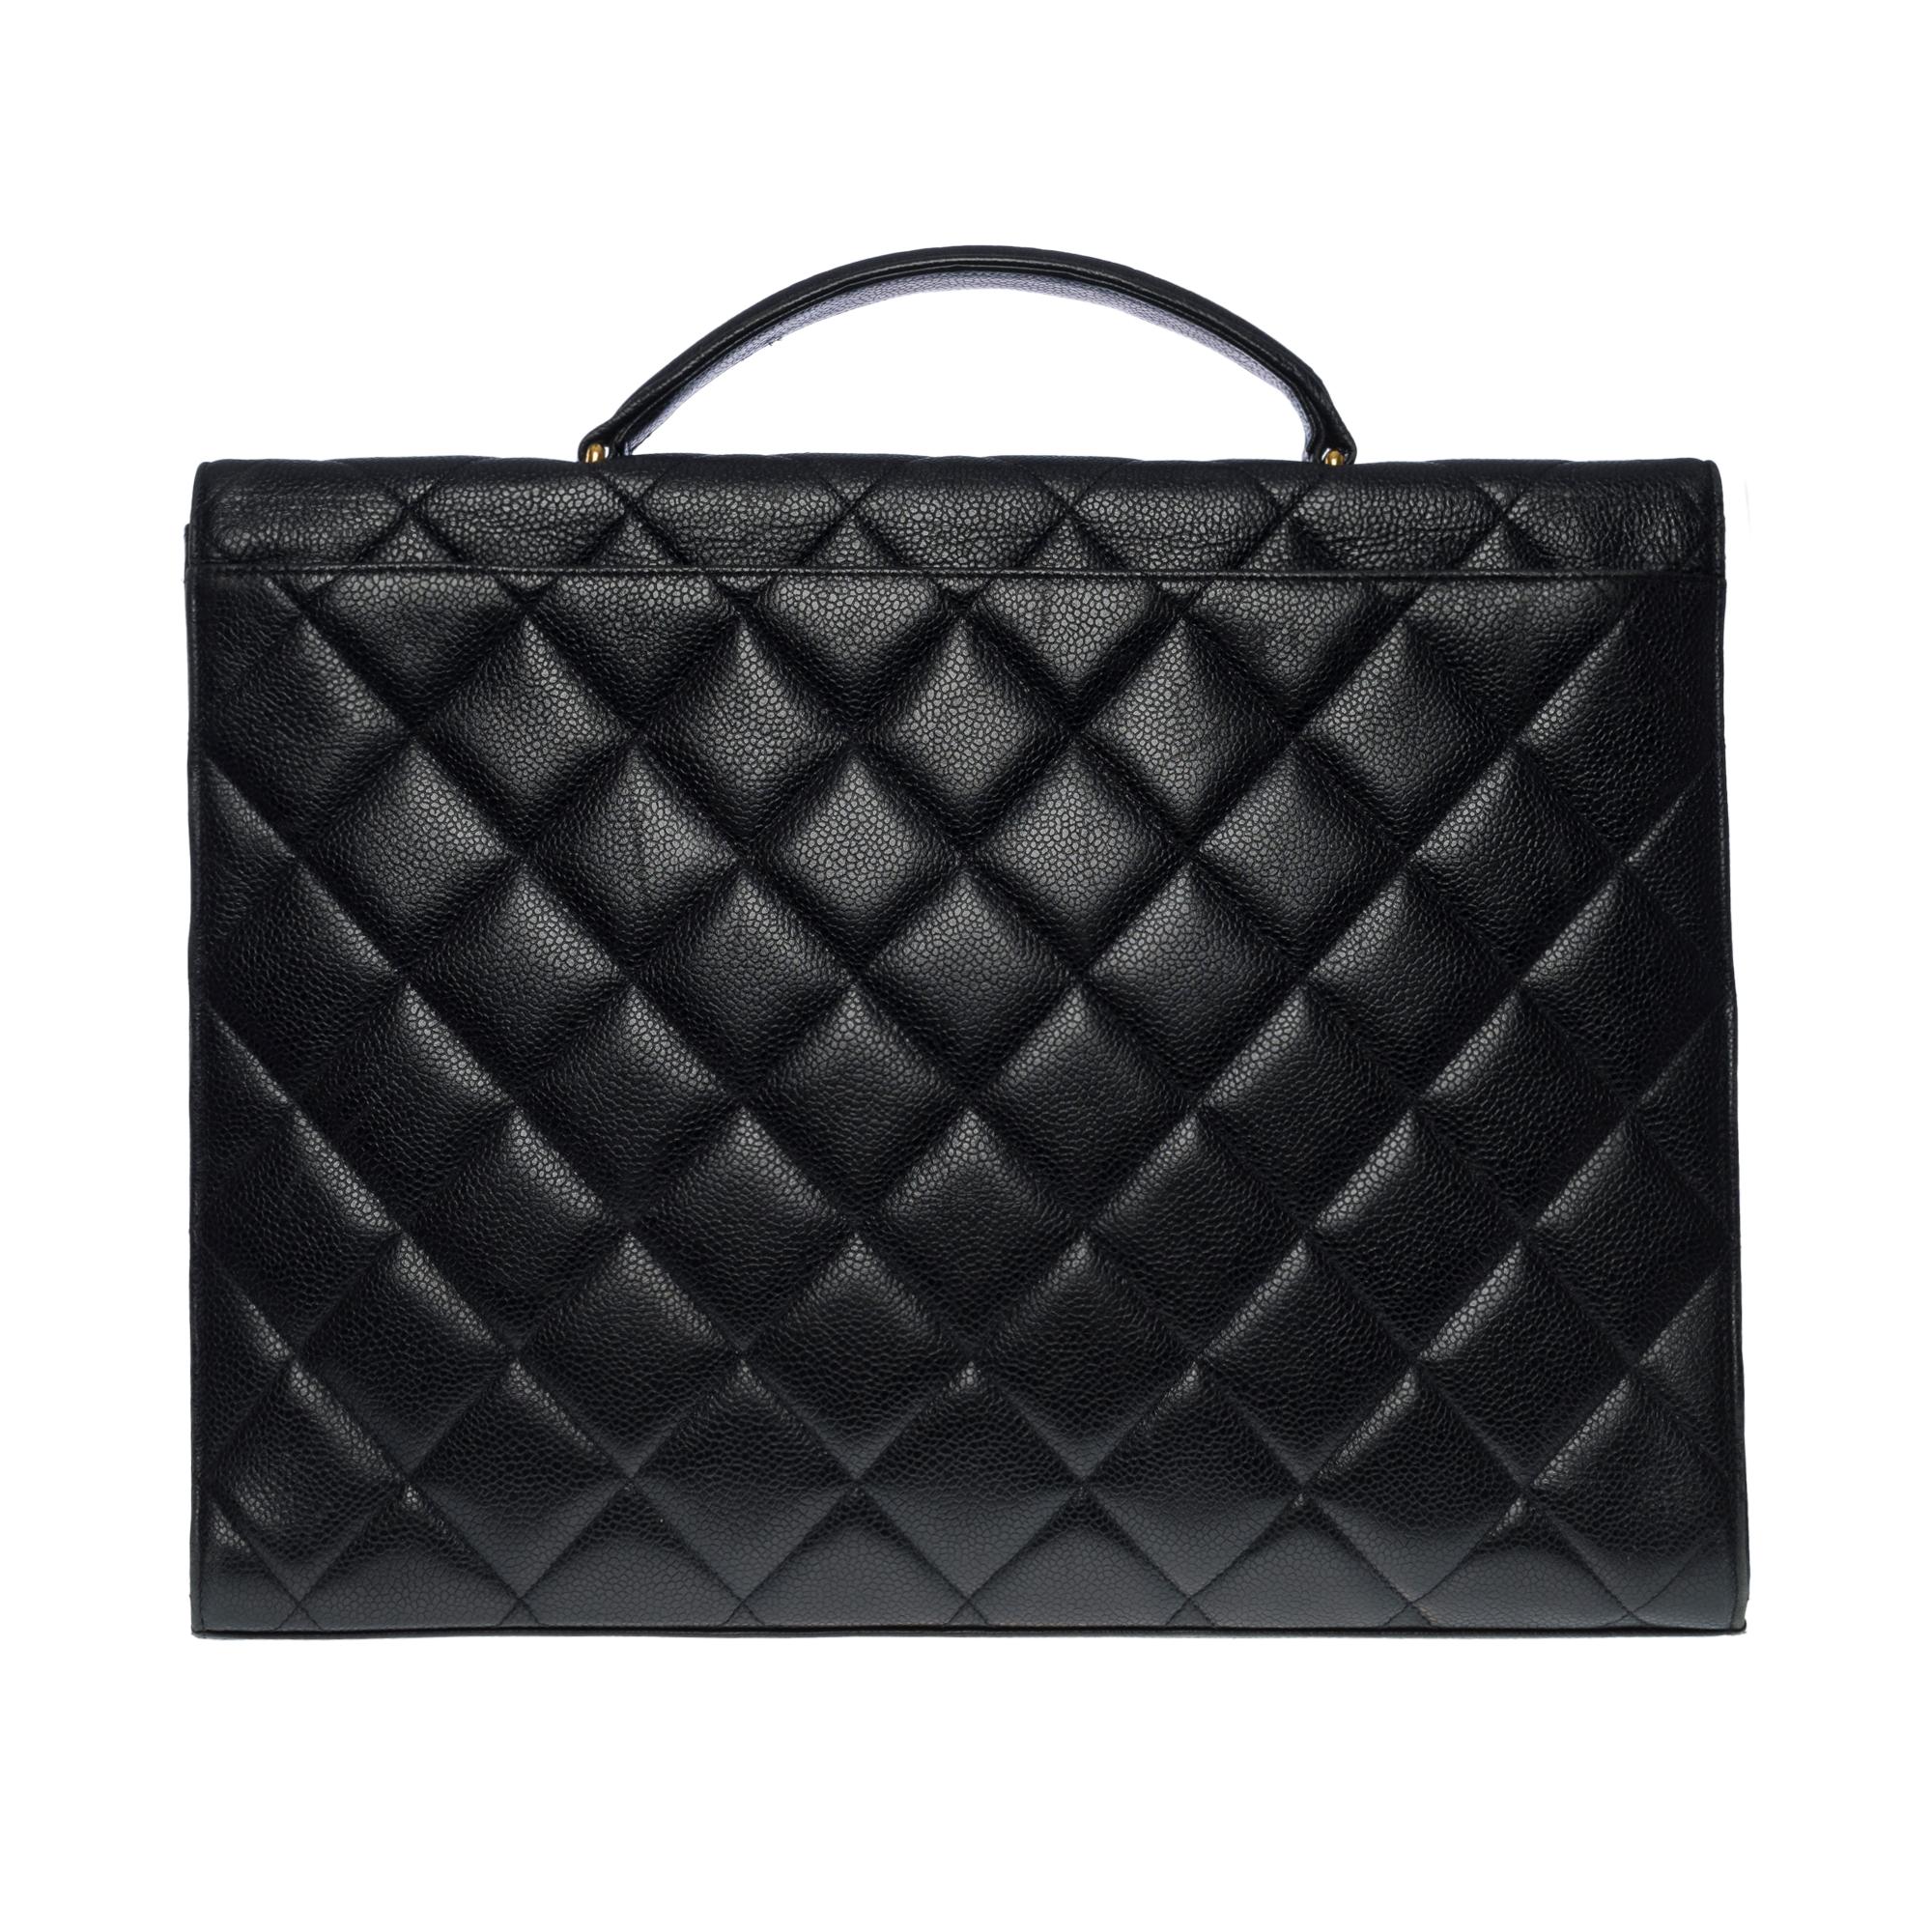 Classy Chanel Briefcase in black caviar quilted leather, gold-plated metal hardware, a simple handle in black caviar leather for a hand-carried
Patch pocket on back of bag
Closure by flap, clasp with CC gold logo latch
Black leather lining, one